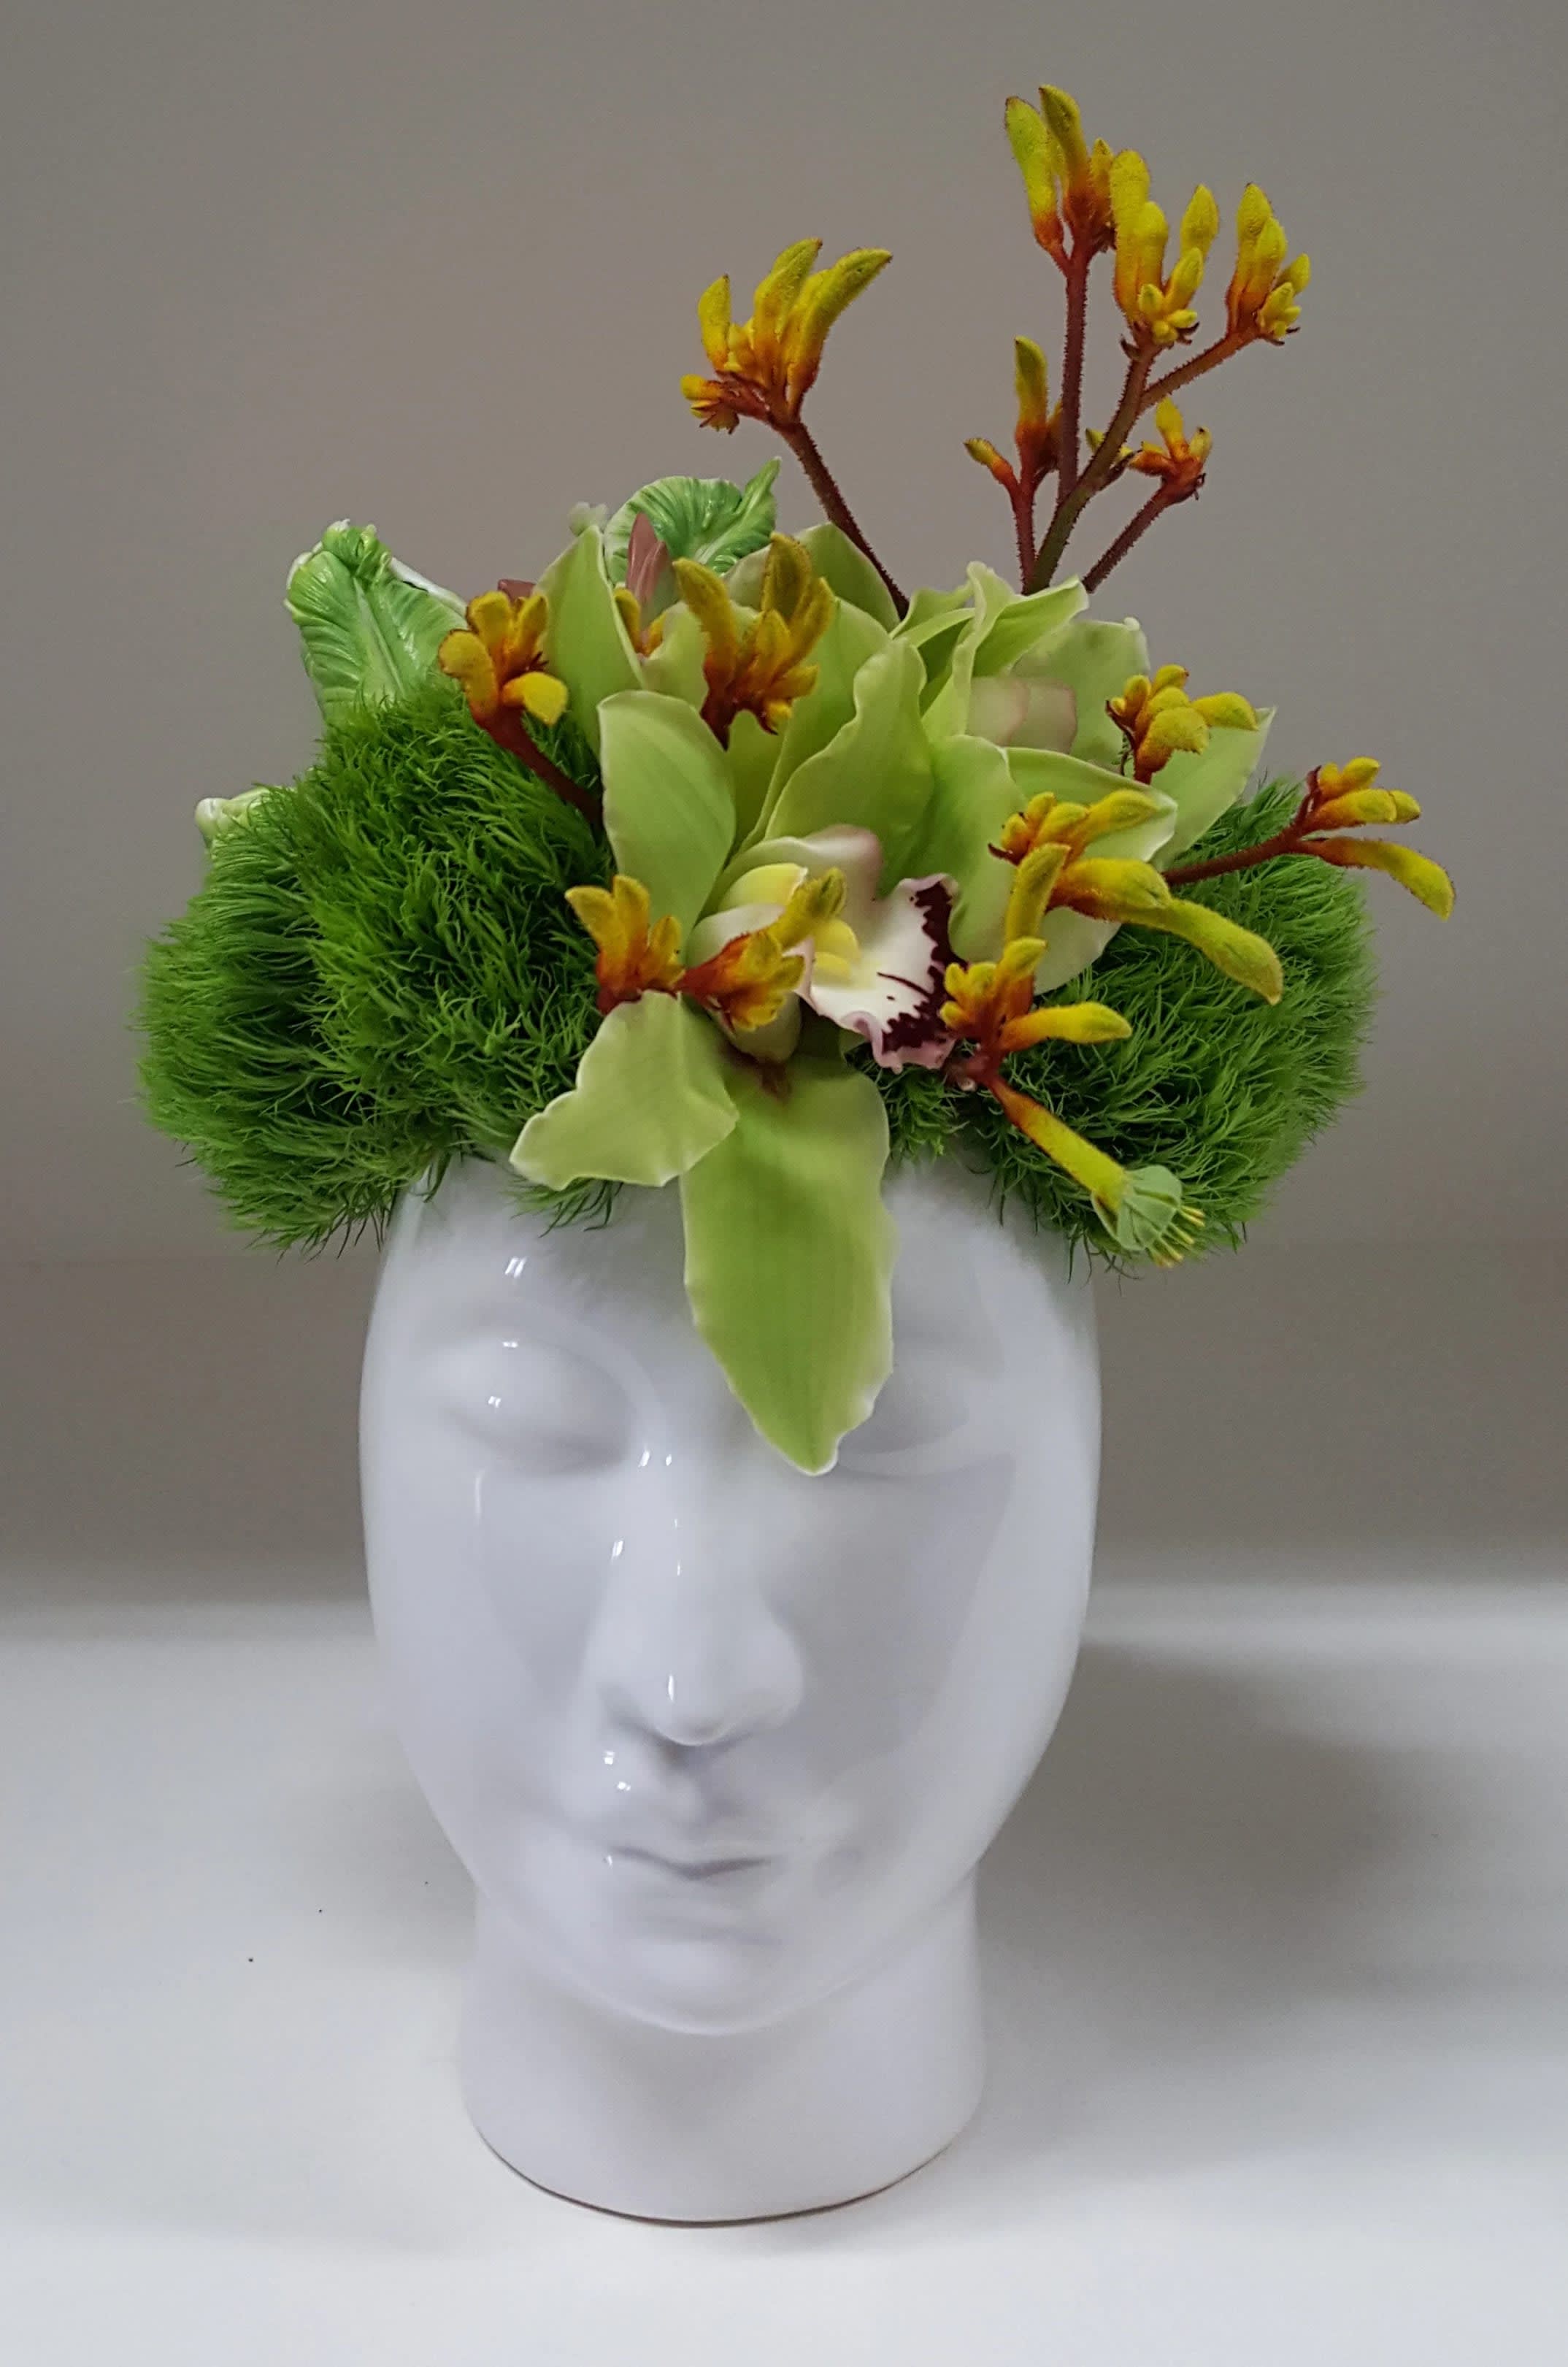 Modern Reflection - A modern design using green dianthus, orchids, kangaroo paw along with parrot tulips.